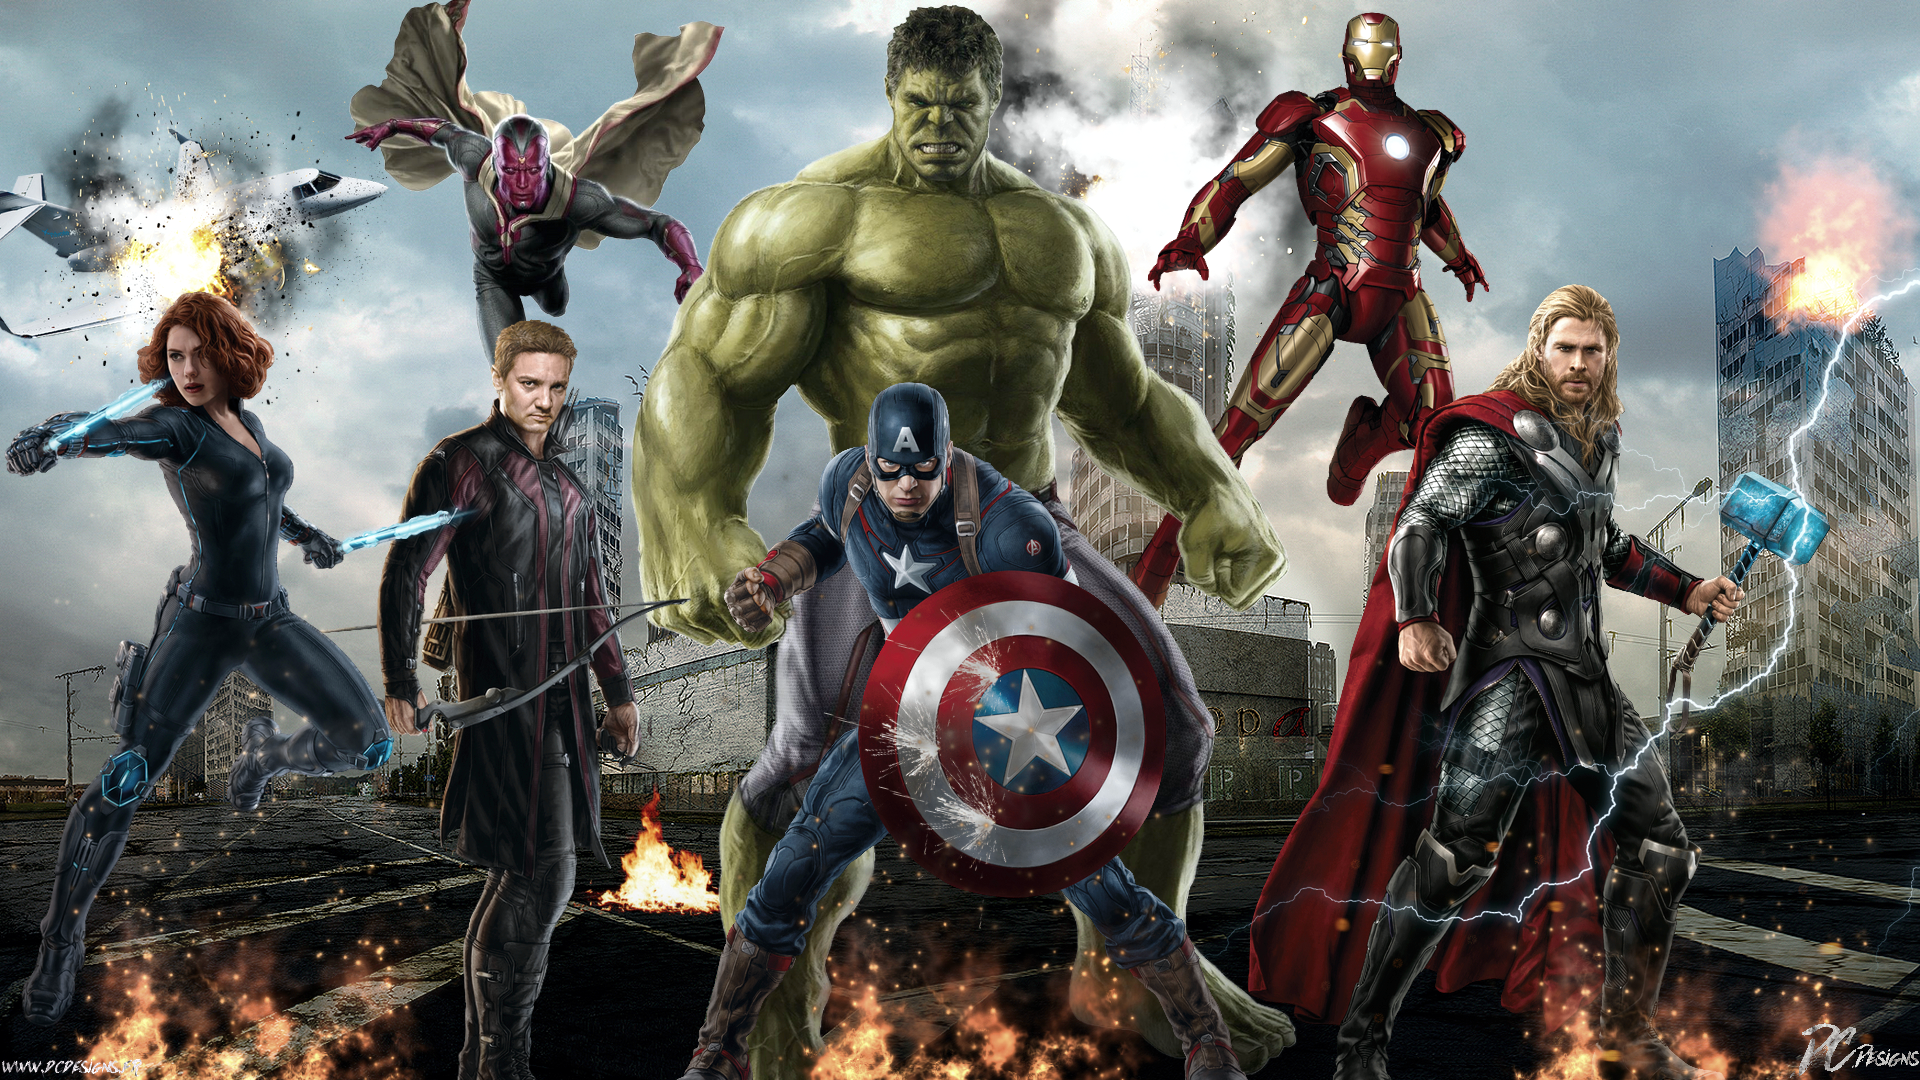 190+ Avengers: Age of Ultron HD Wallpapers and Backgrounds